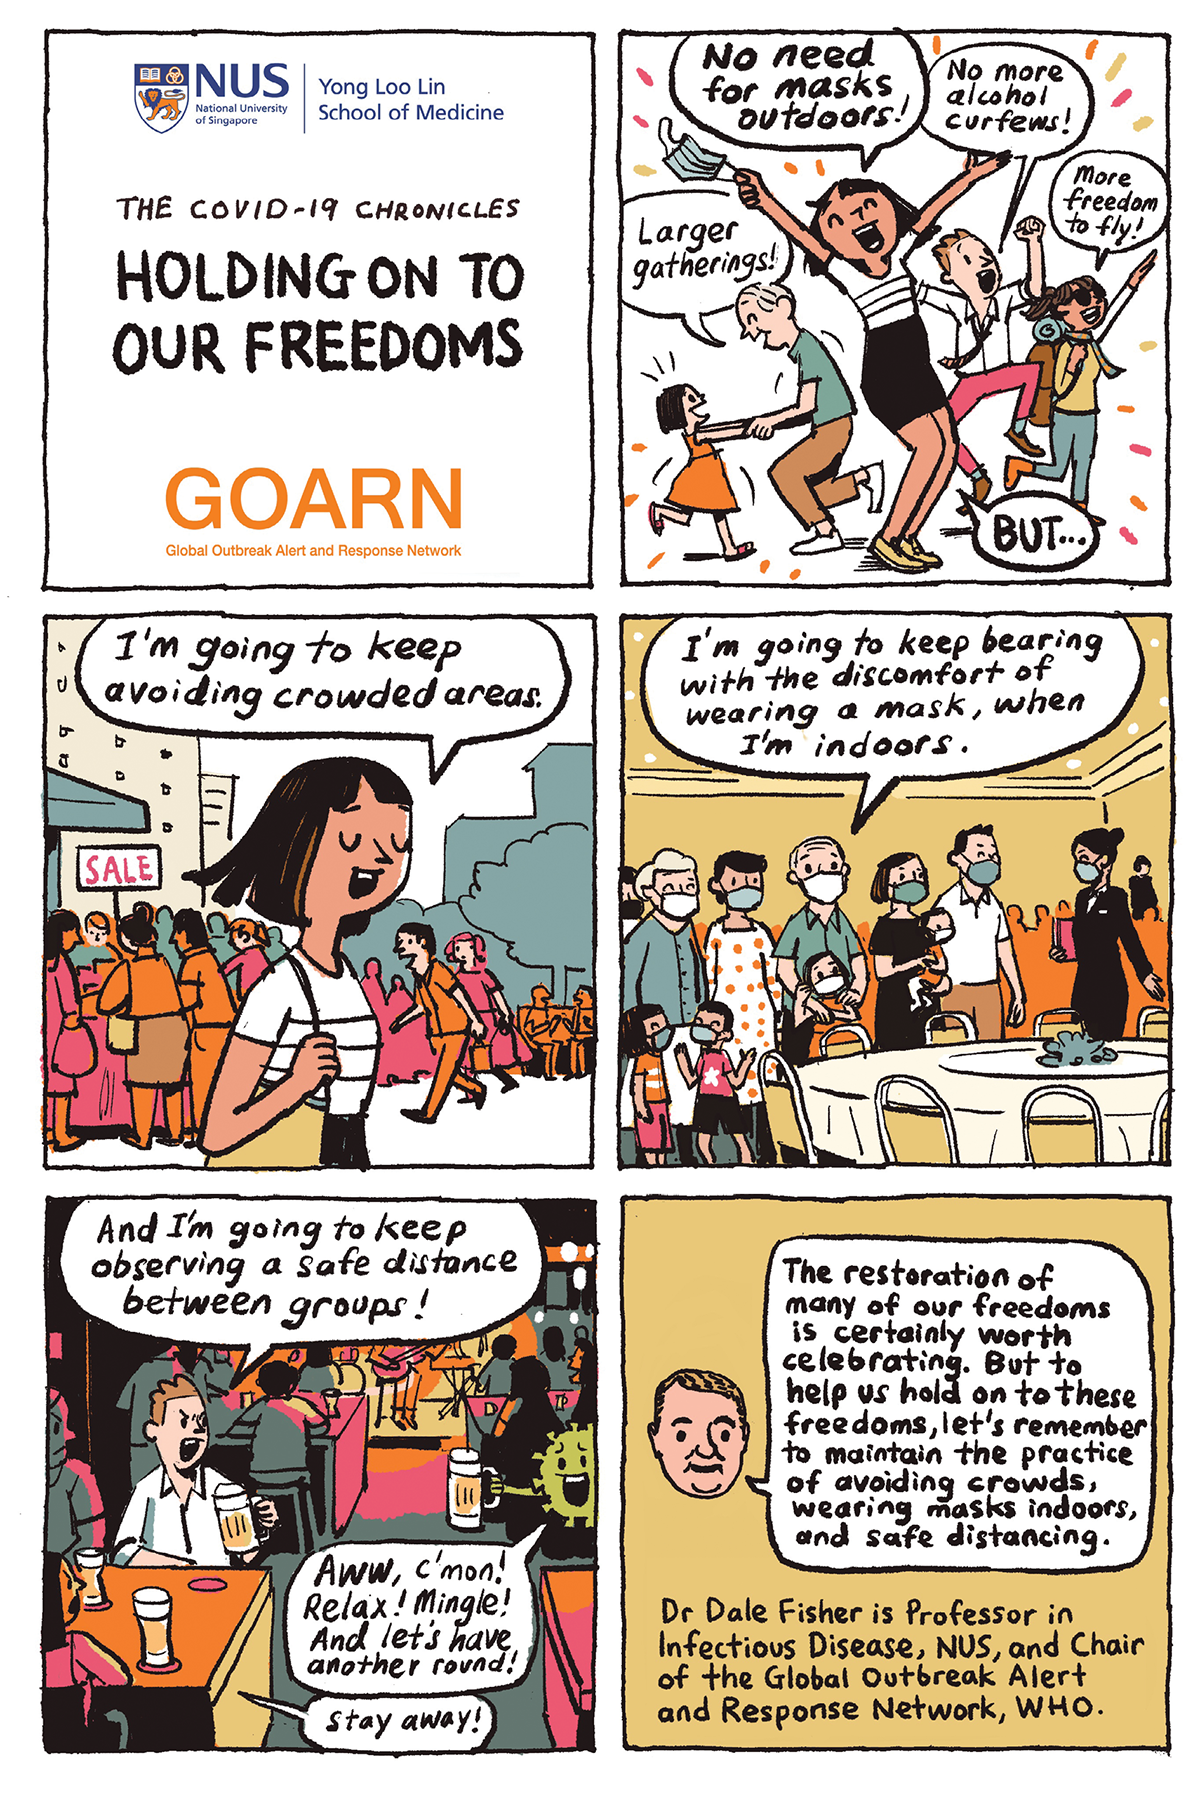 The COVID-19 Chronicles webcomic - Holding On To Our Freedoms